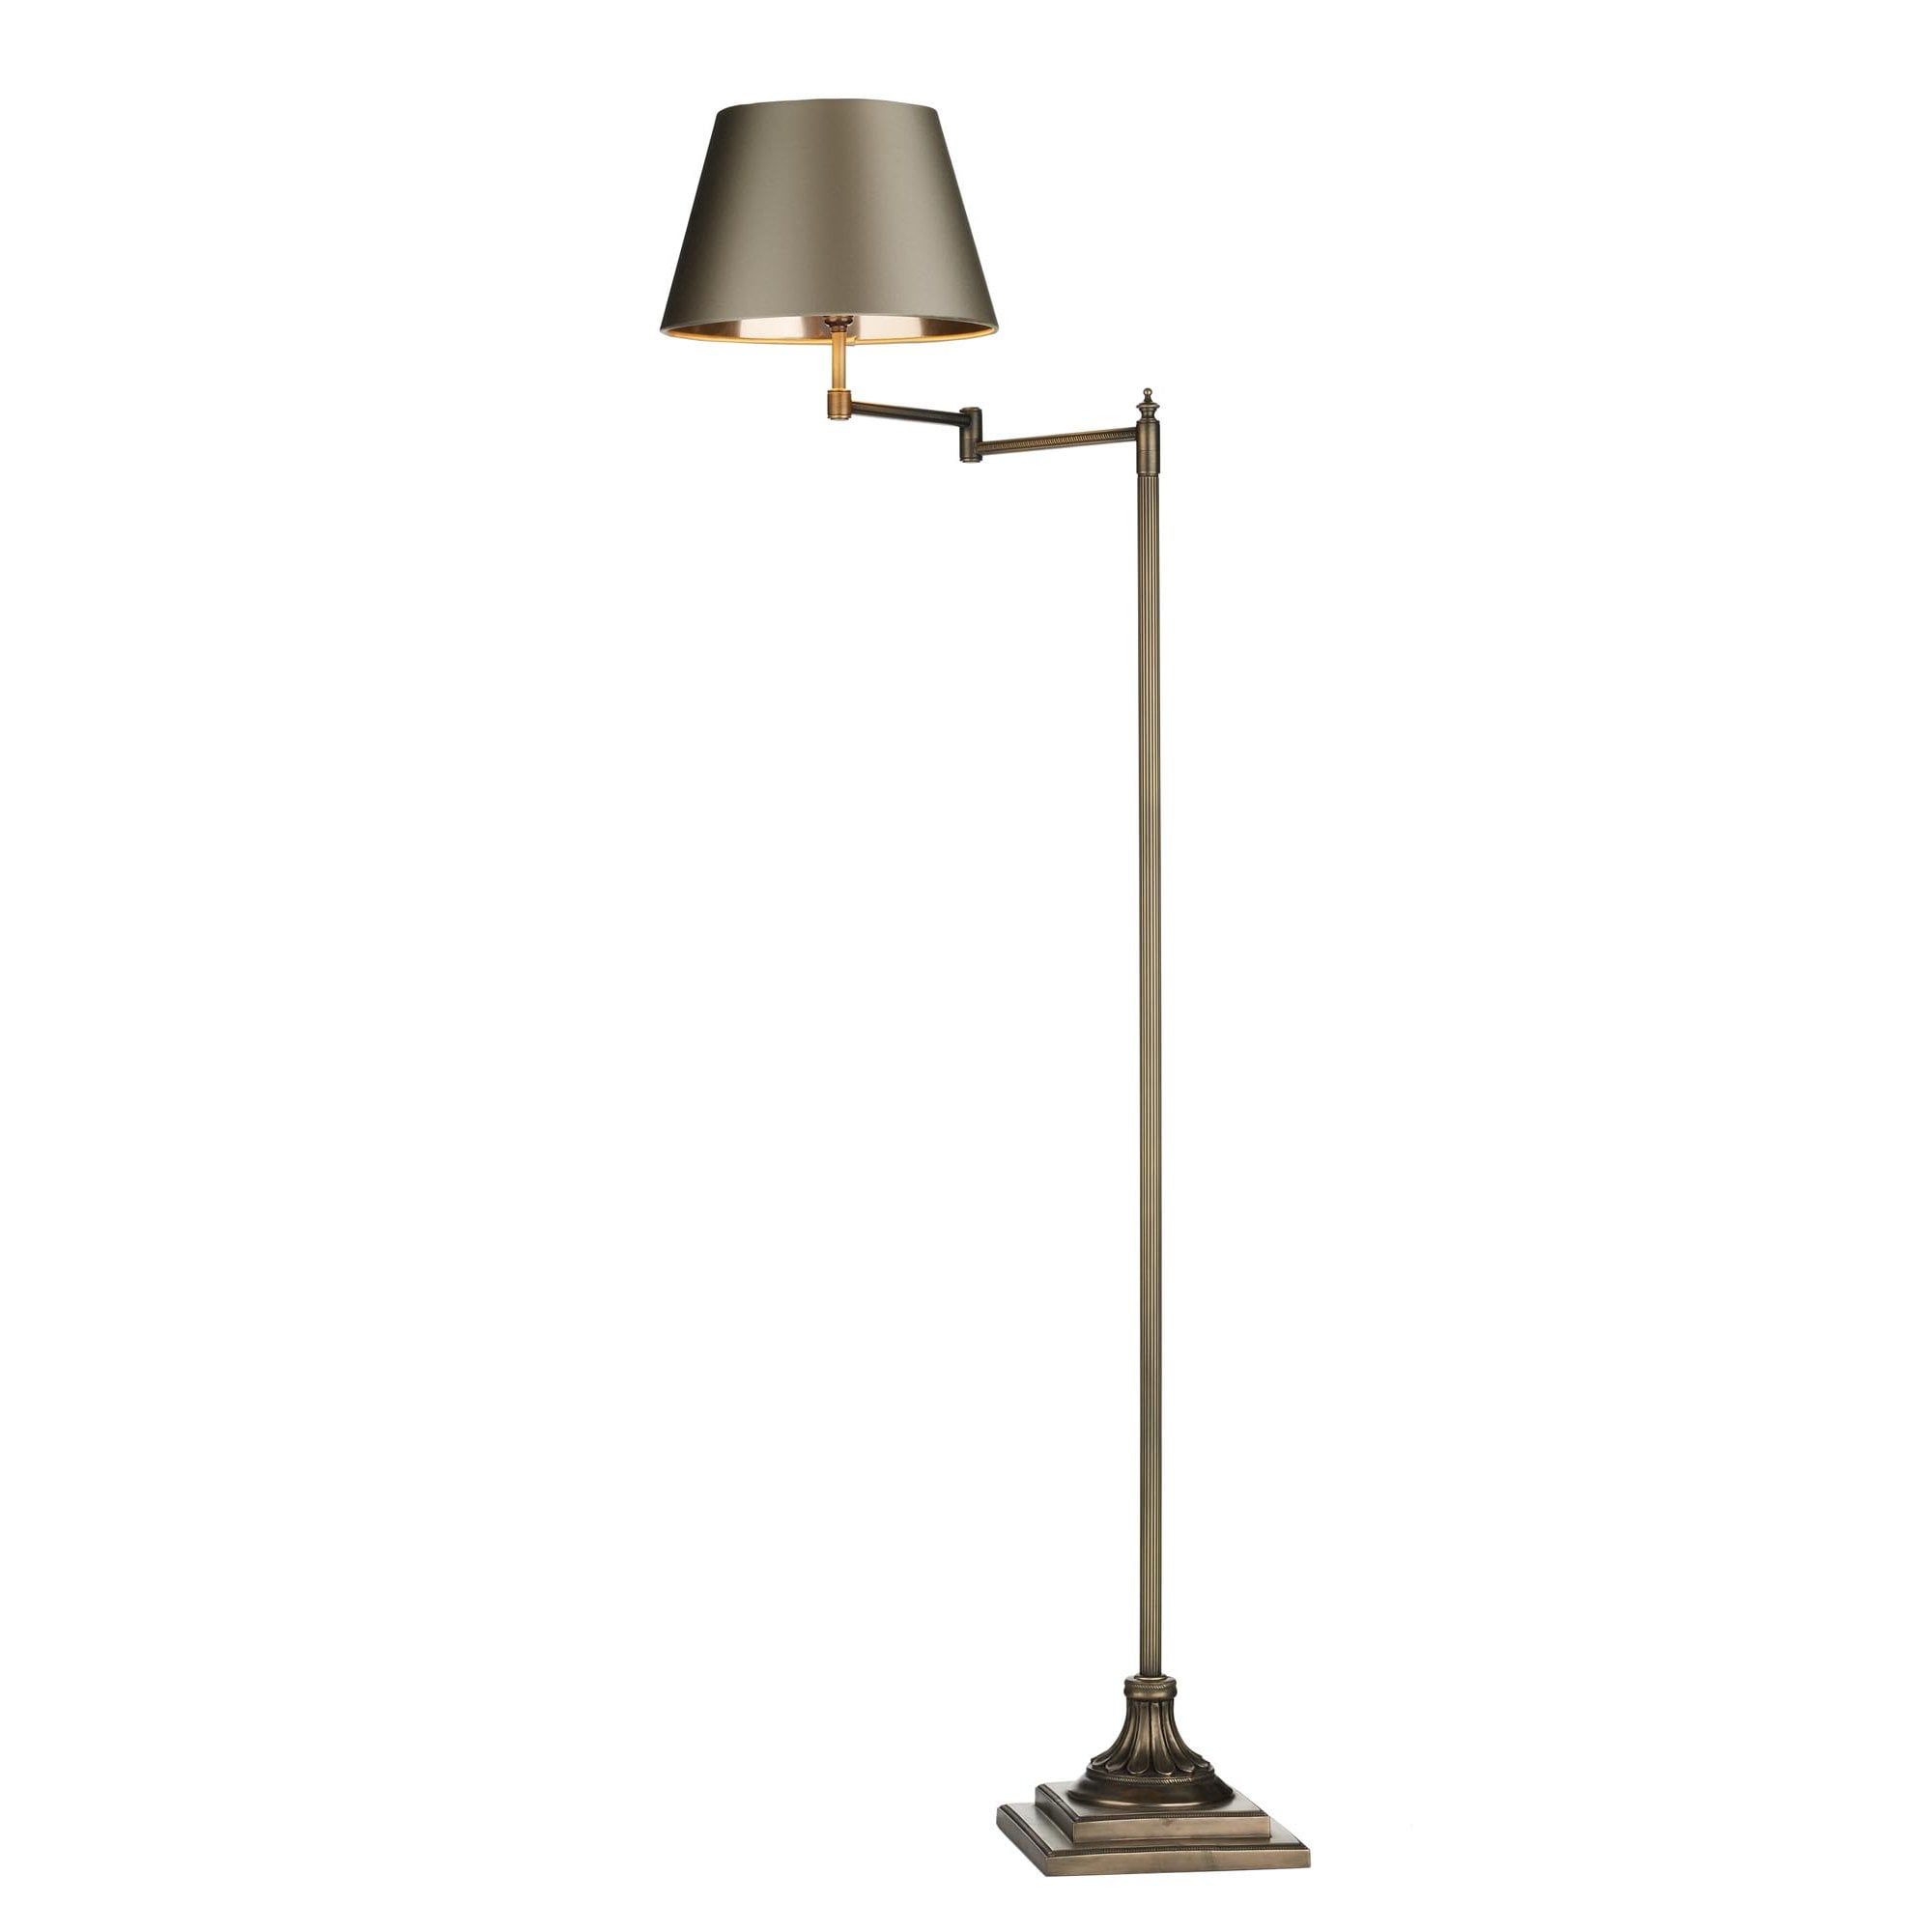 Adjustble Arm Standing Lamps With 2020 Floor Lamp Antique Brass With Swivel Arm Right Lighting And Lights Uk (View 11 of 15)